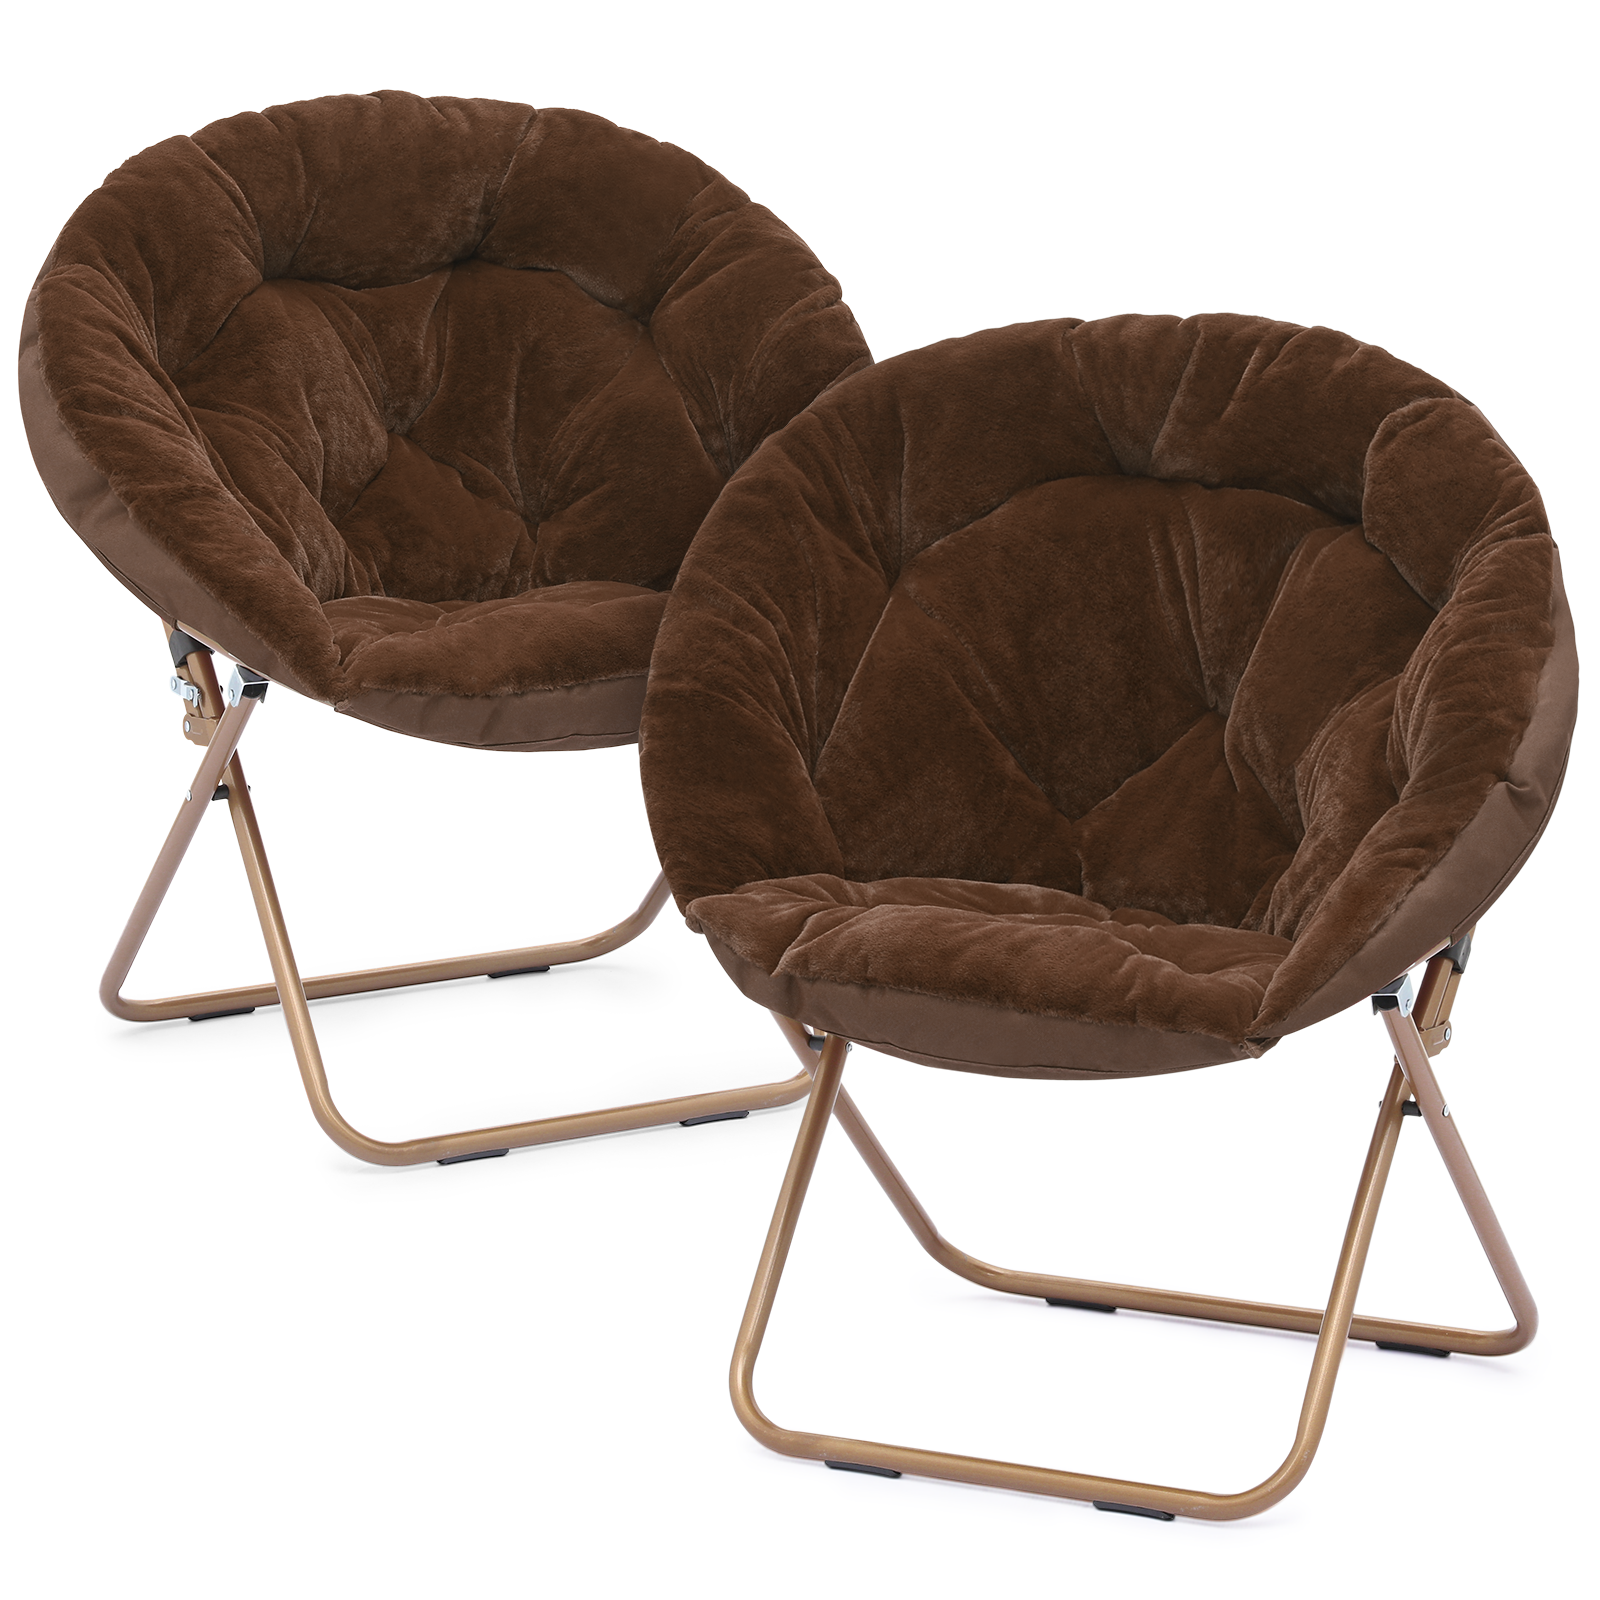 Magshion 2-Piece Folding Lounge Chair Comfy Faux Fur Saucer Chair, Cozy Moon Chair Seating with Metal Frame for Home Living Room Bedroom, Brown - image 1 of 10